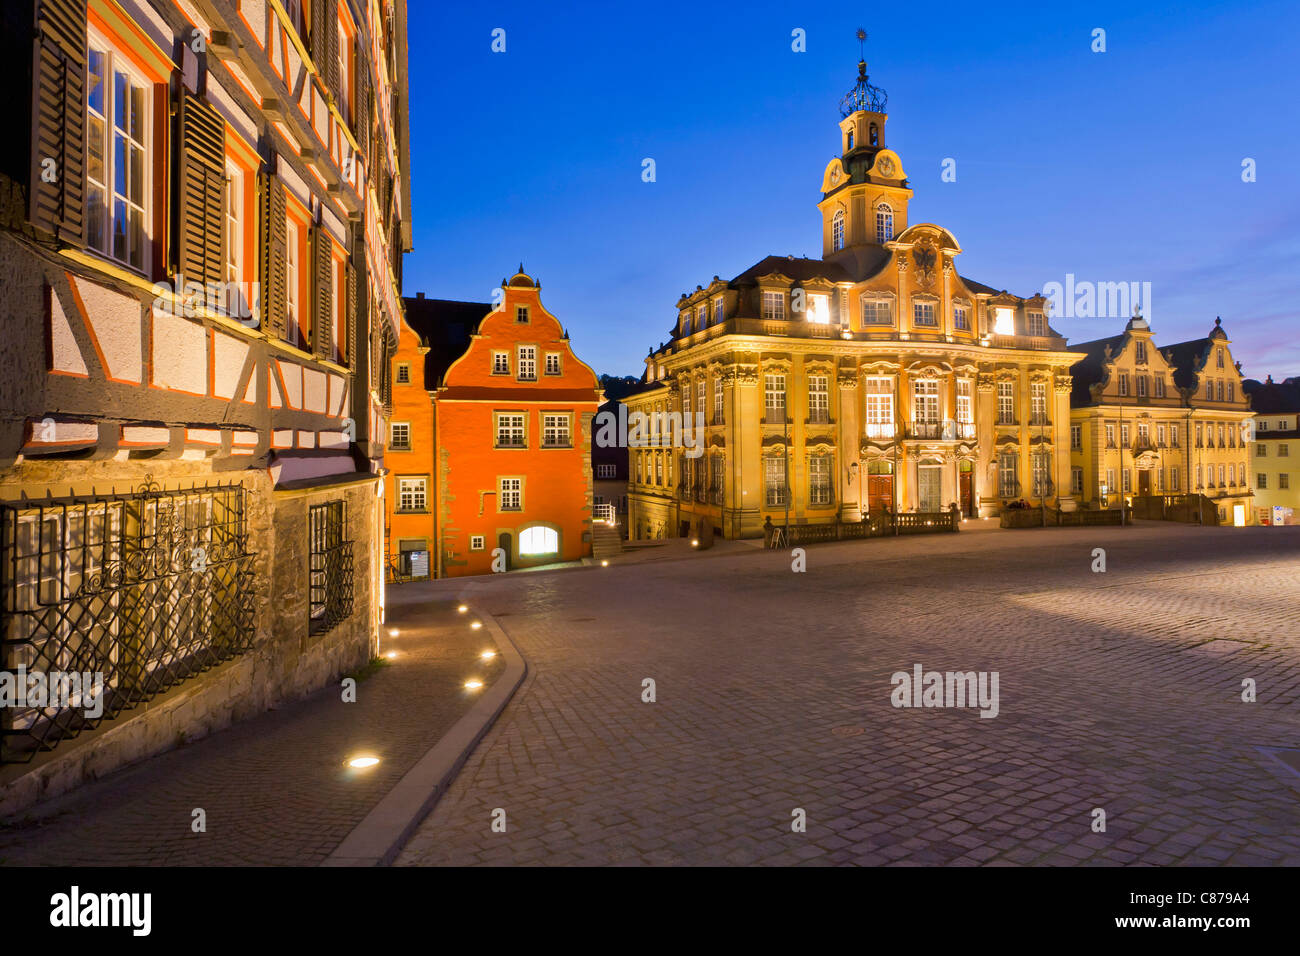 Germany, Baden-Wurttemberg, Schwabisch Hall, View of town hall at market place Stock Photo